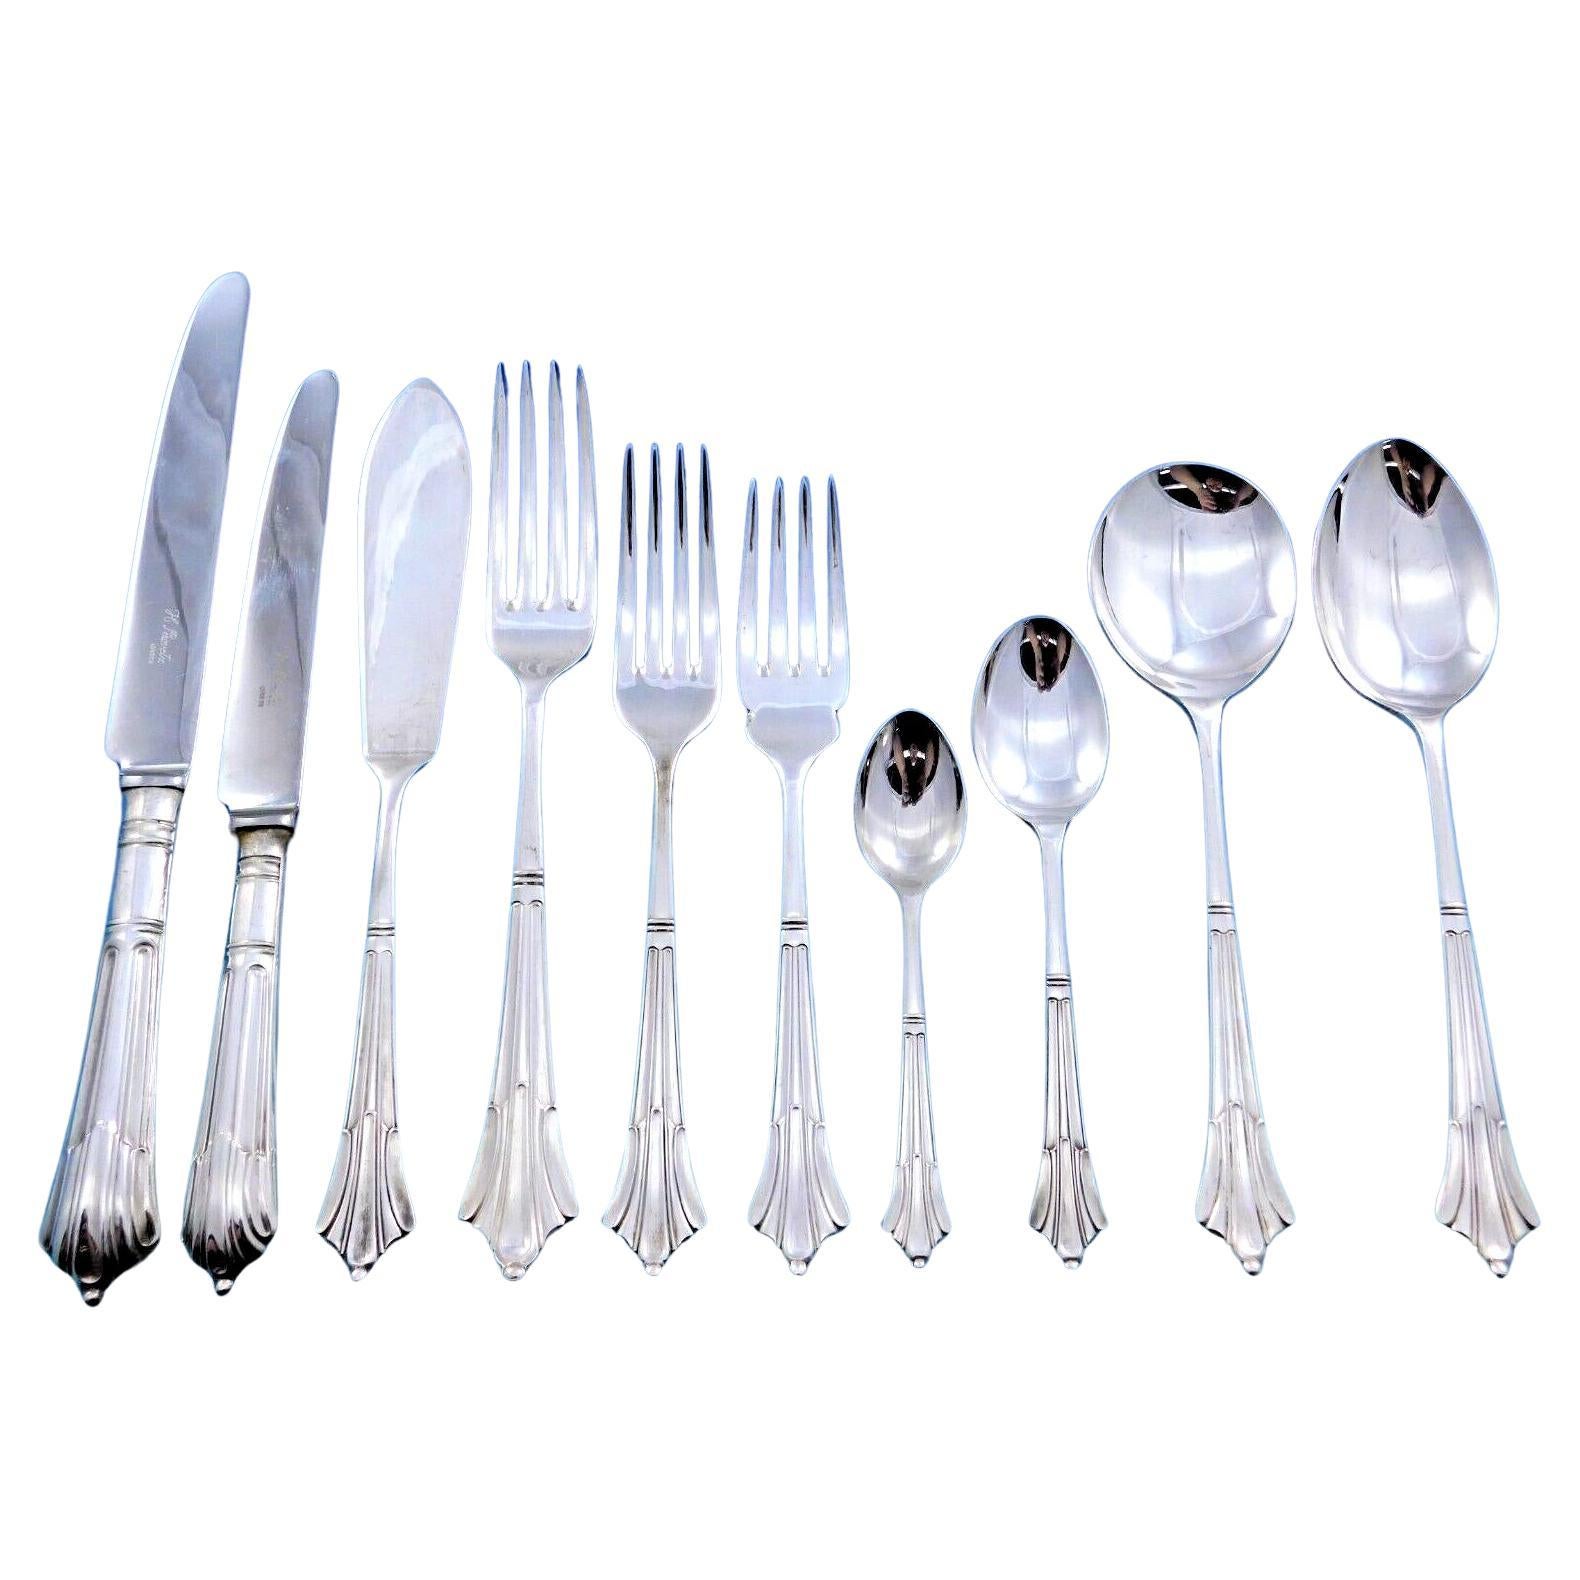 Albany by Arthur Price Silverplated Flatware Set Service for 8 Dinner 90 pieces For Sale